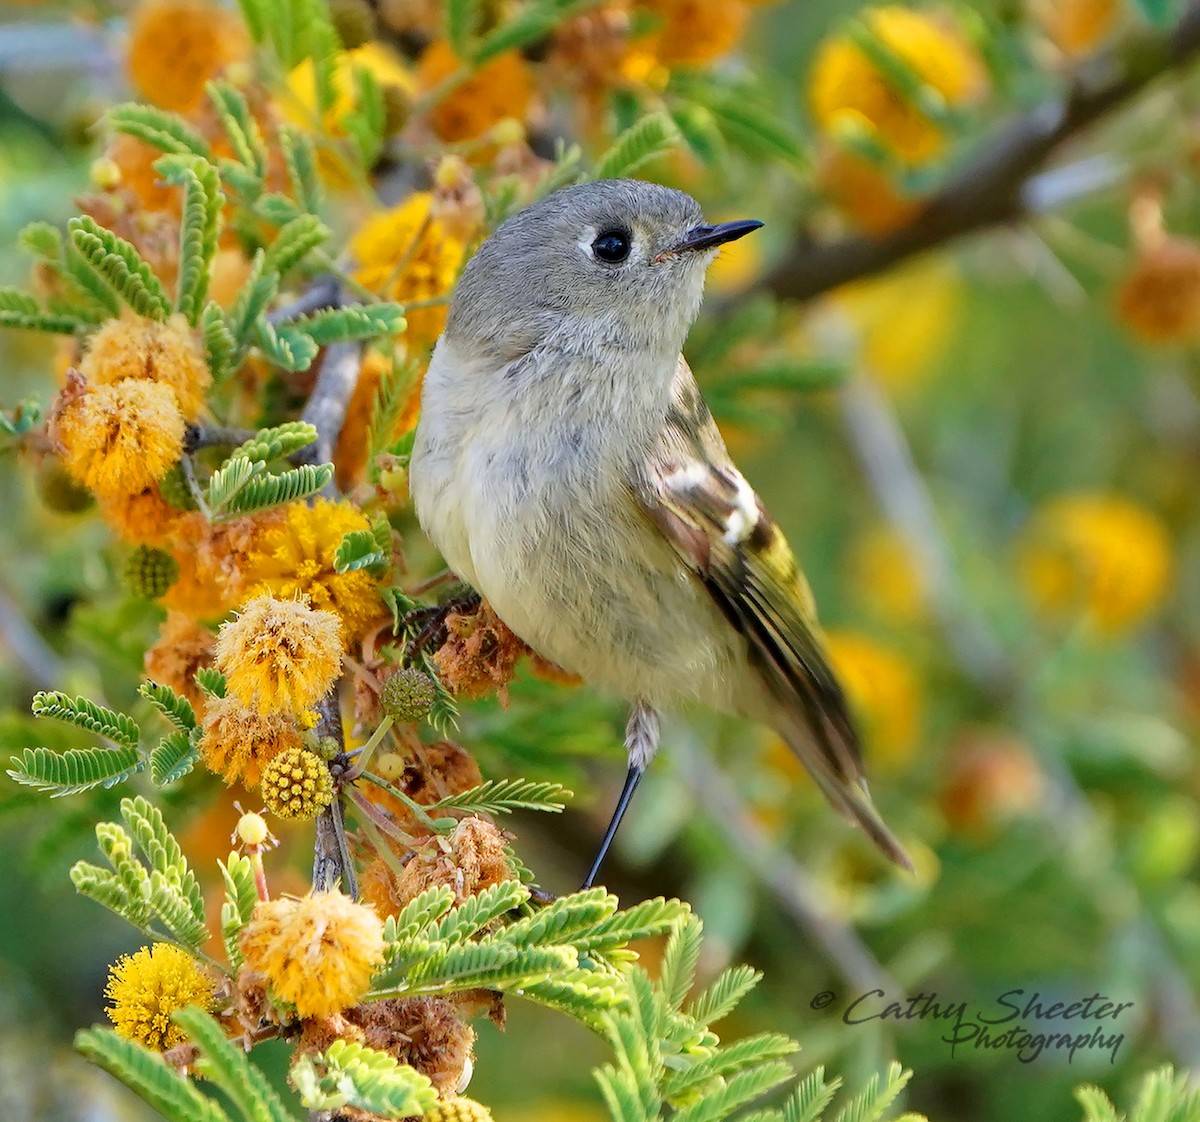 Ruby-crowned Kinglet - Cathy Sheeter